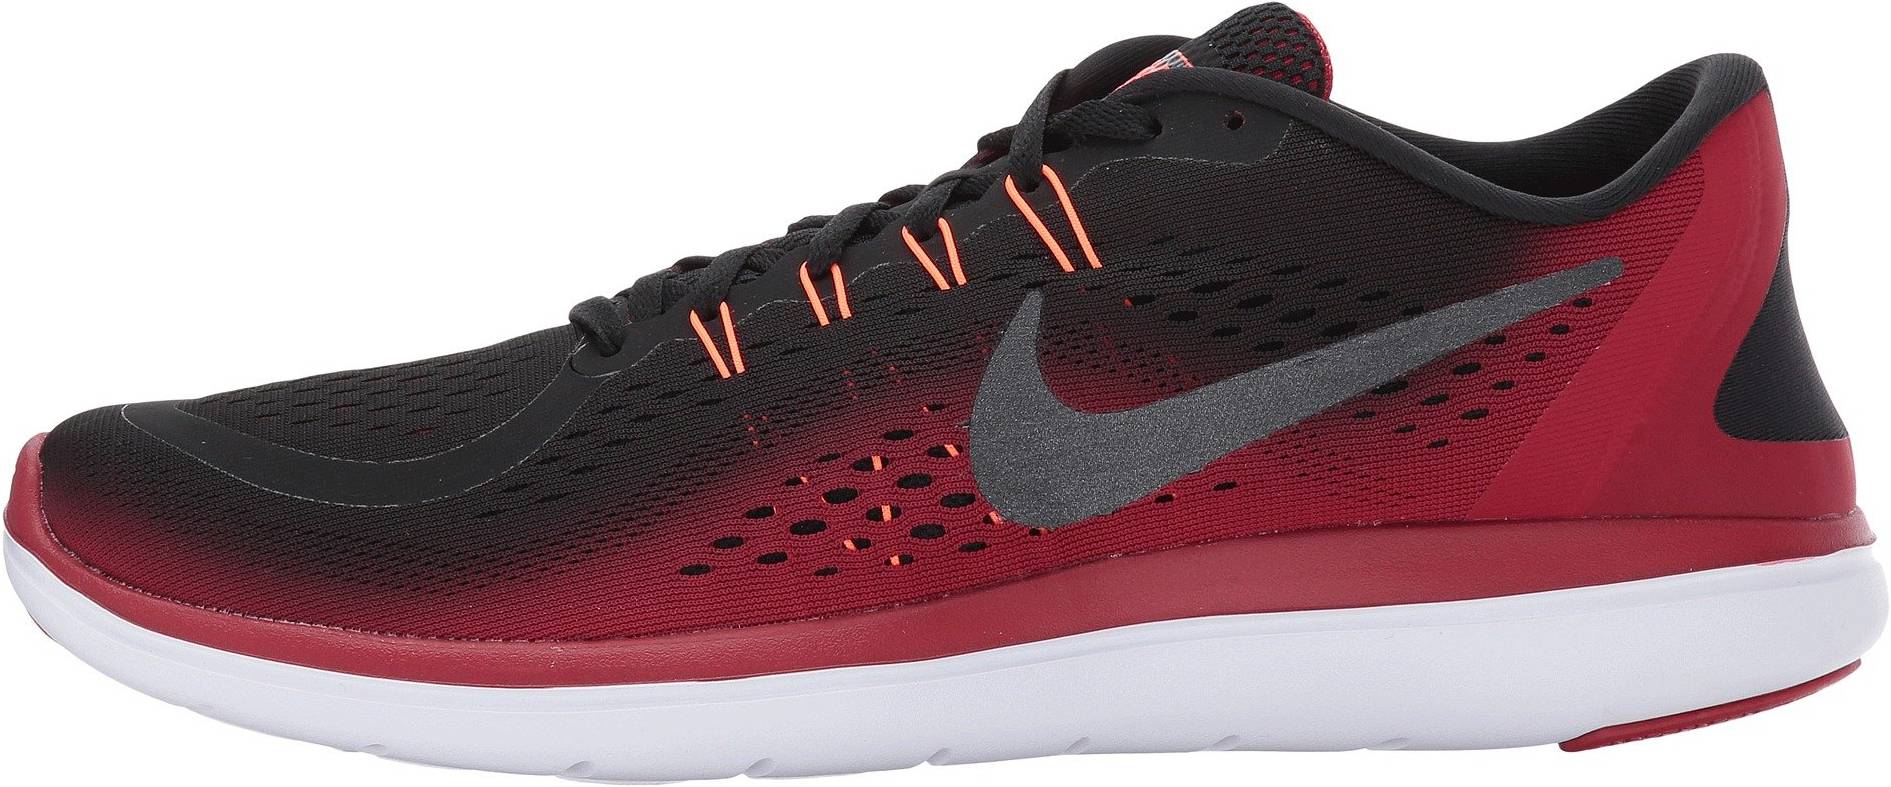 10+ Nike Flex running shoes: Save up 40% |